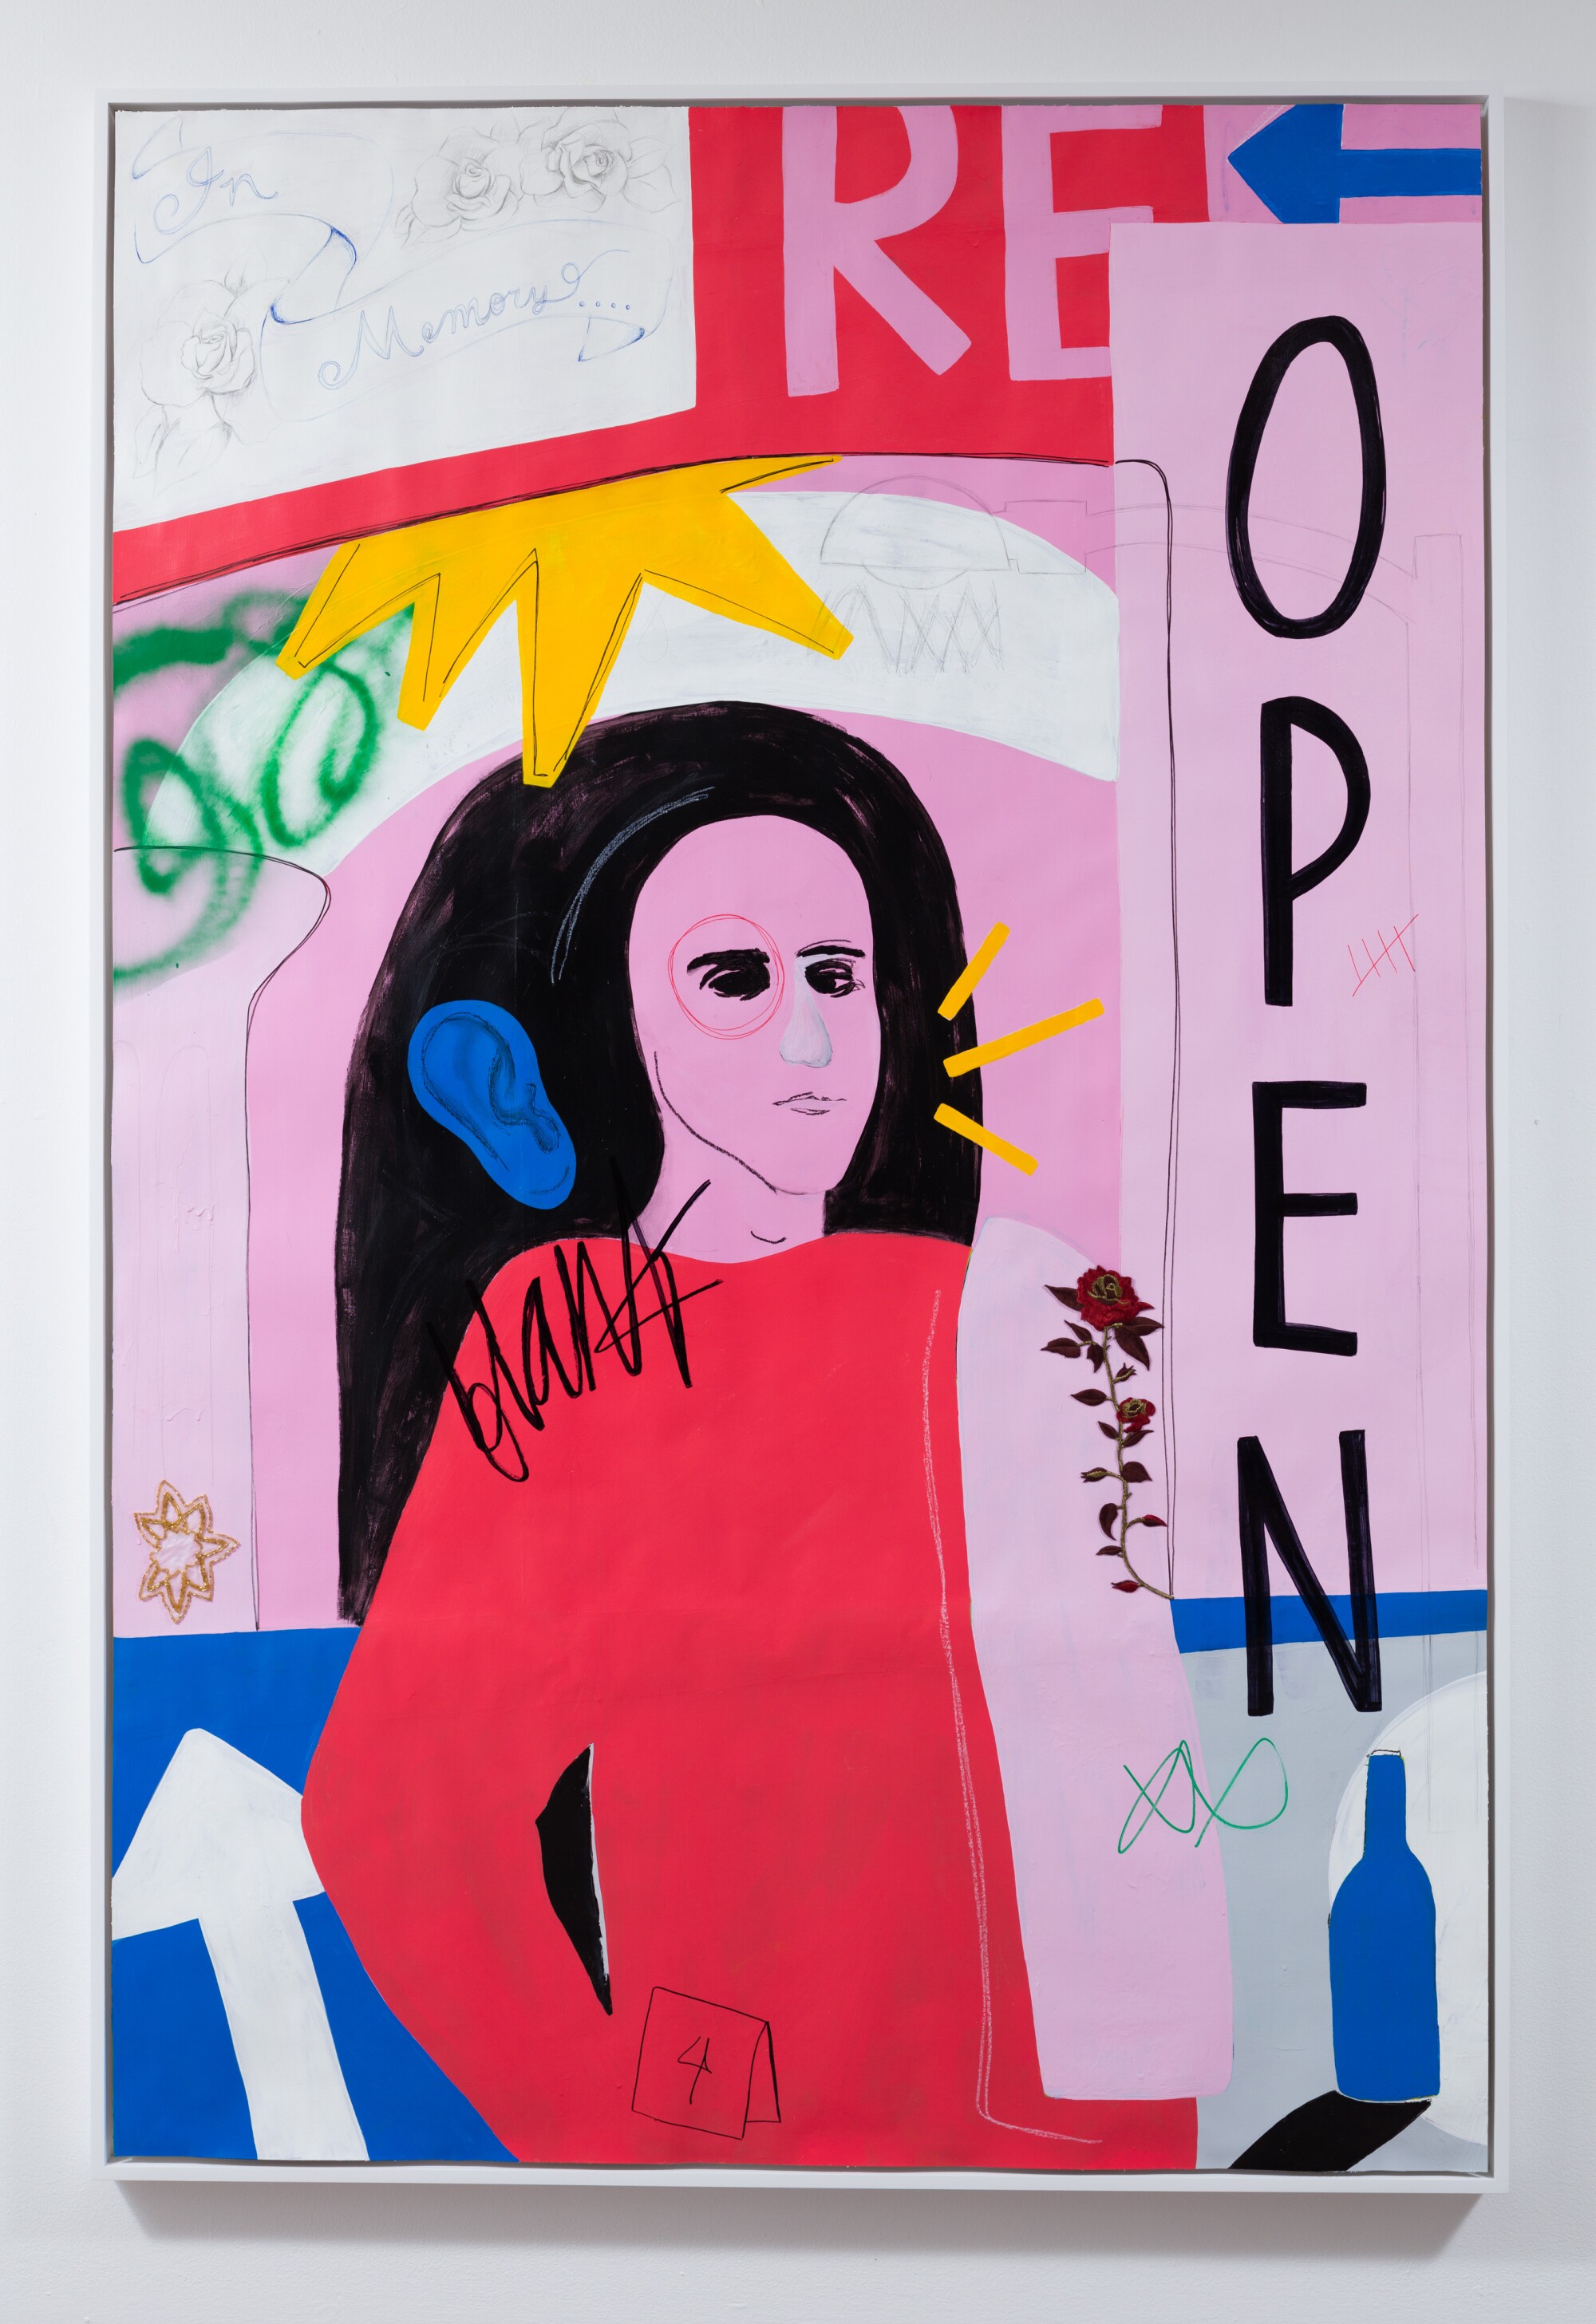 A colorful piece of art depicts a person and the word "Open"